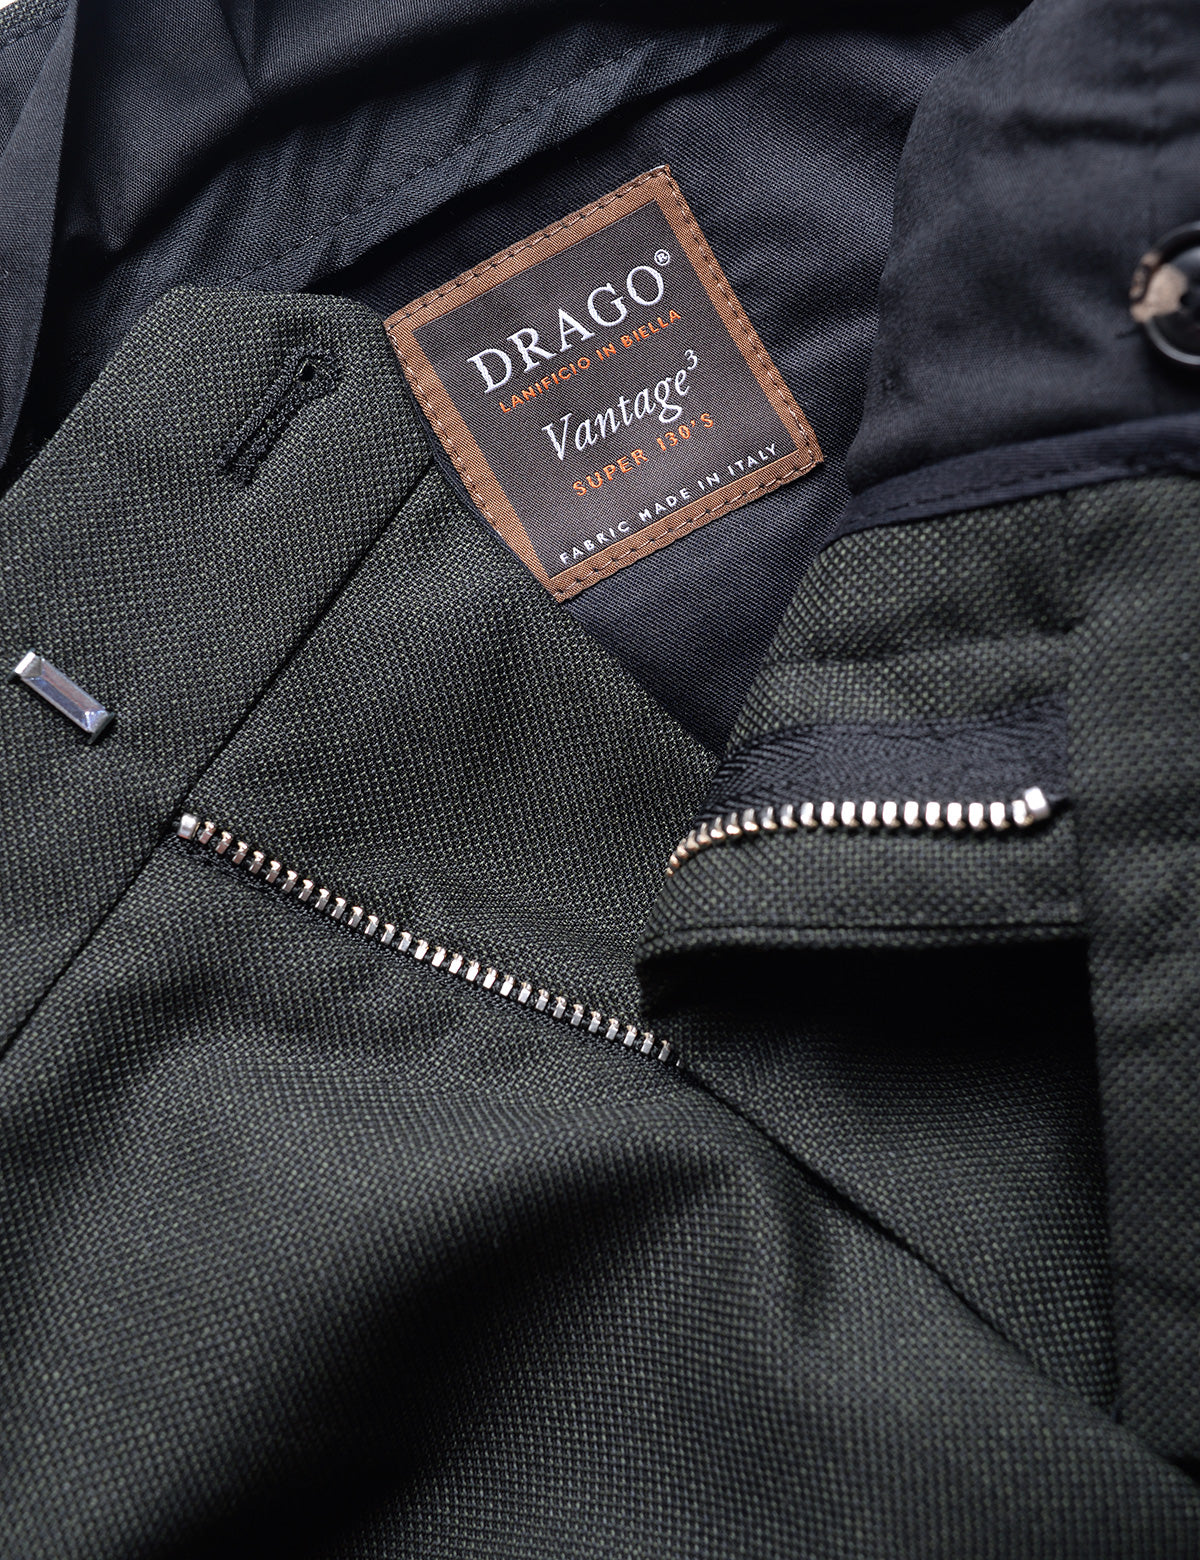 Detail of BKT50 Tailored Trousers in Textured Wool - Wrought Iron showing interior Drago label